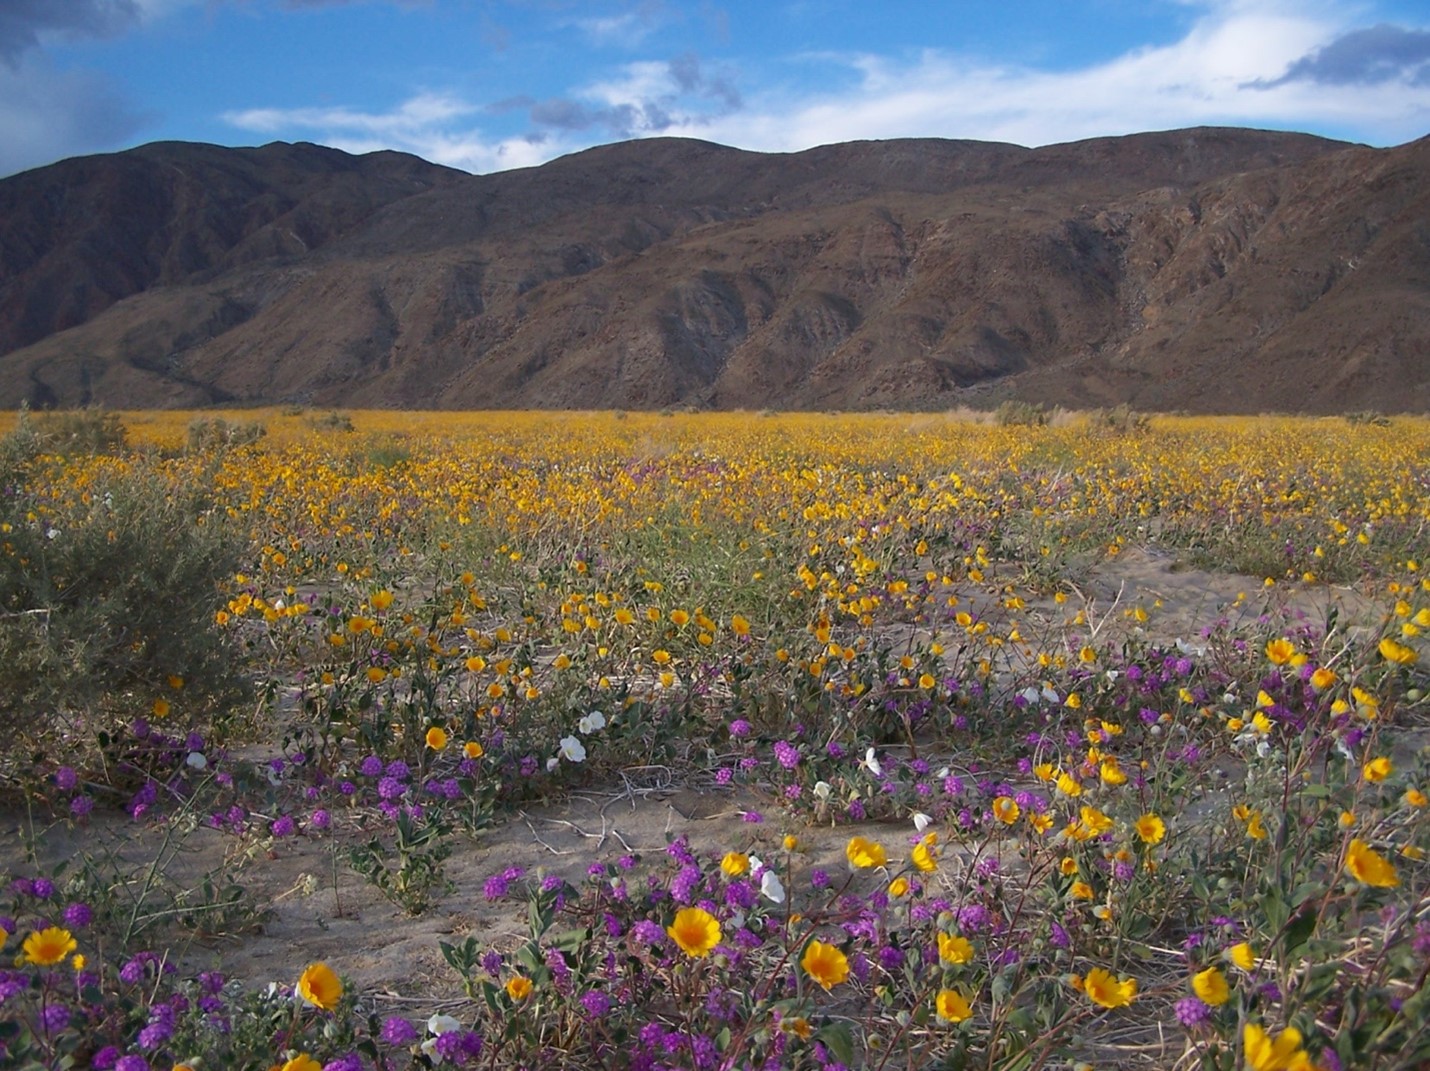 Like desert wildflowers that bloom after rain, soil bacteria have evolved life strategies that determine when and where they grow. Having a small, streamlined genome may help some bacteria survive in dry soils. 